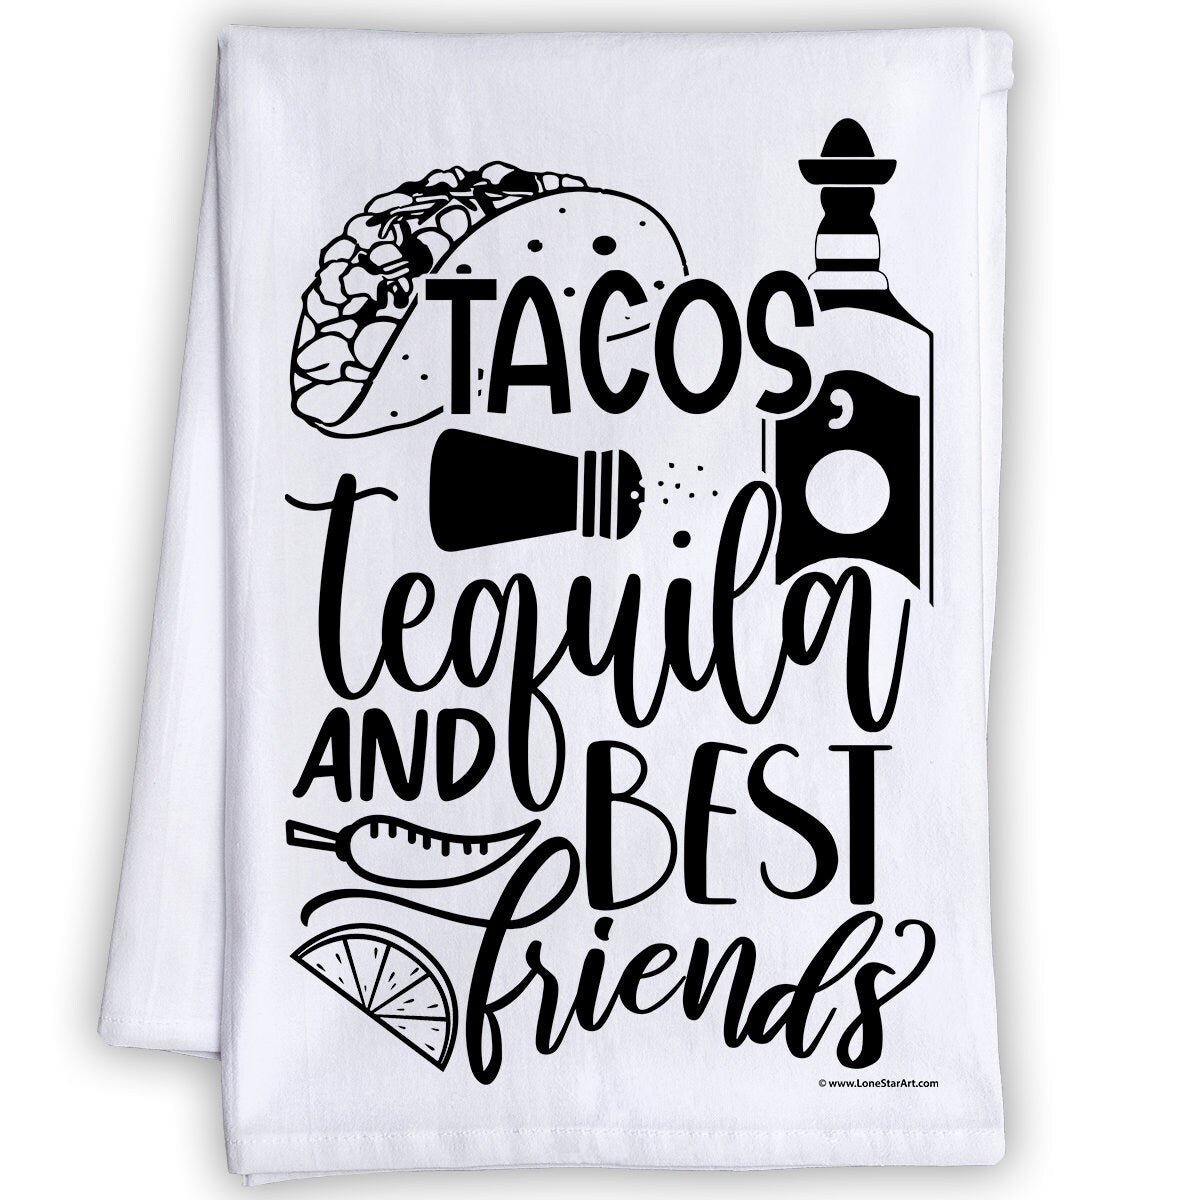 https://lonestarart.com/cdn/shop/products/funny-kitchen-tea-towels-tacos-tequila-and-best-friends-humorous-flour-sack-dish-towel-great-housewarming-gift-and-kitchen-decor-lone-star-art-162111_1445x.jpg?v=1643224203